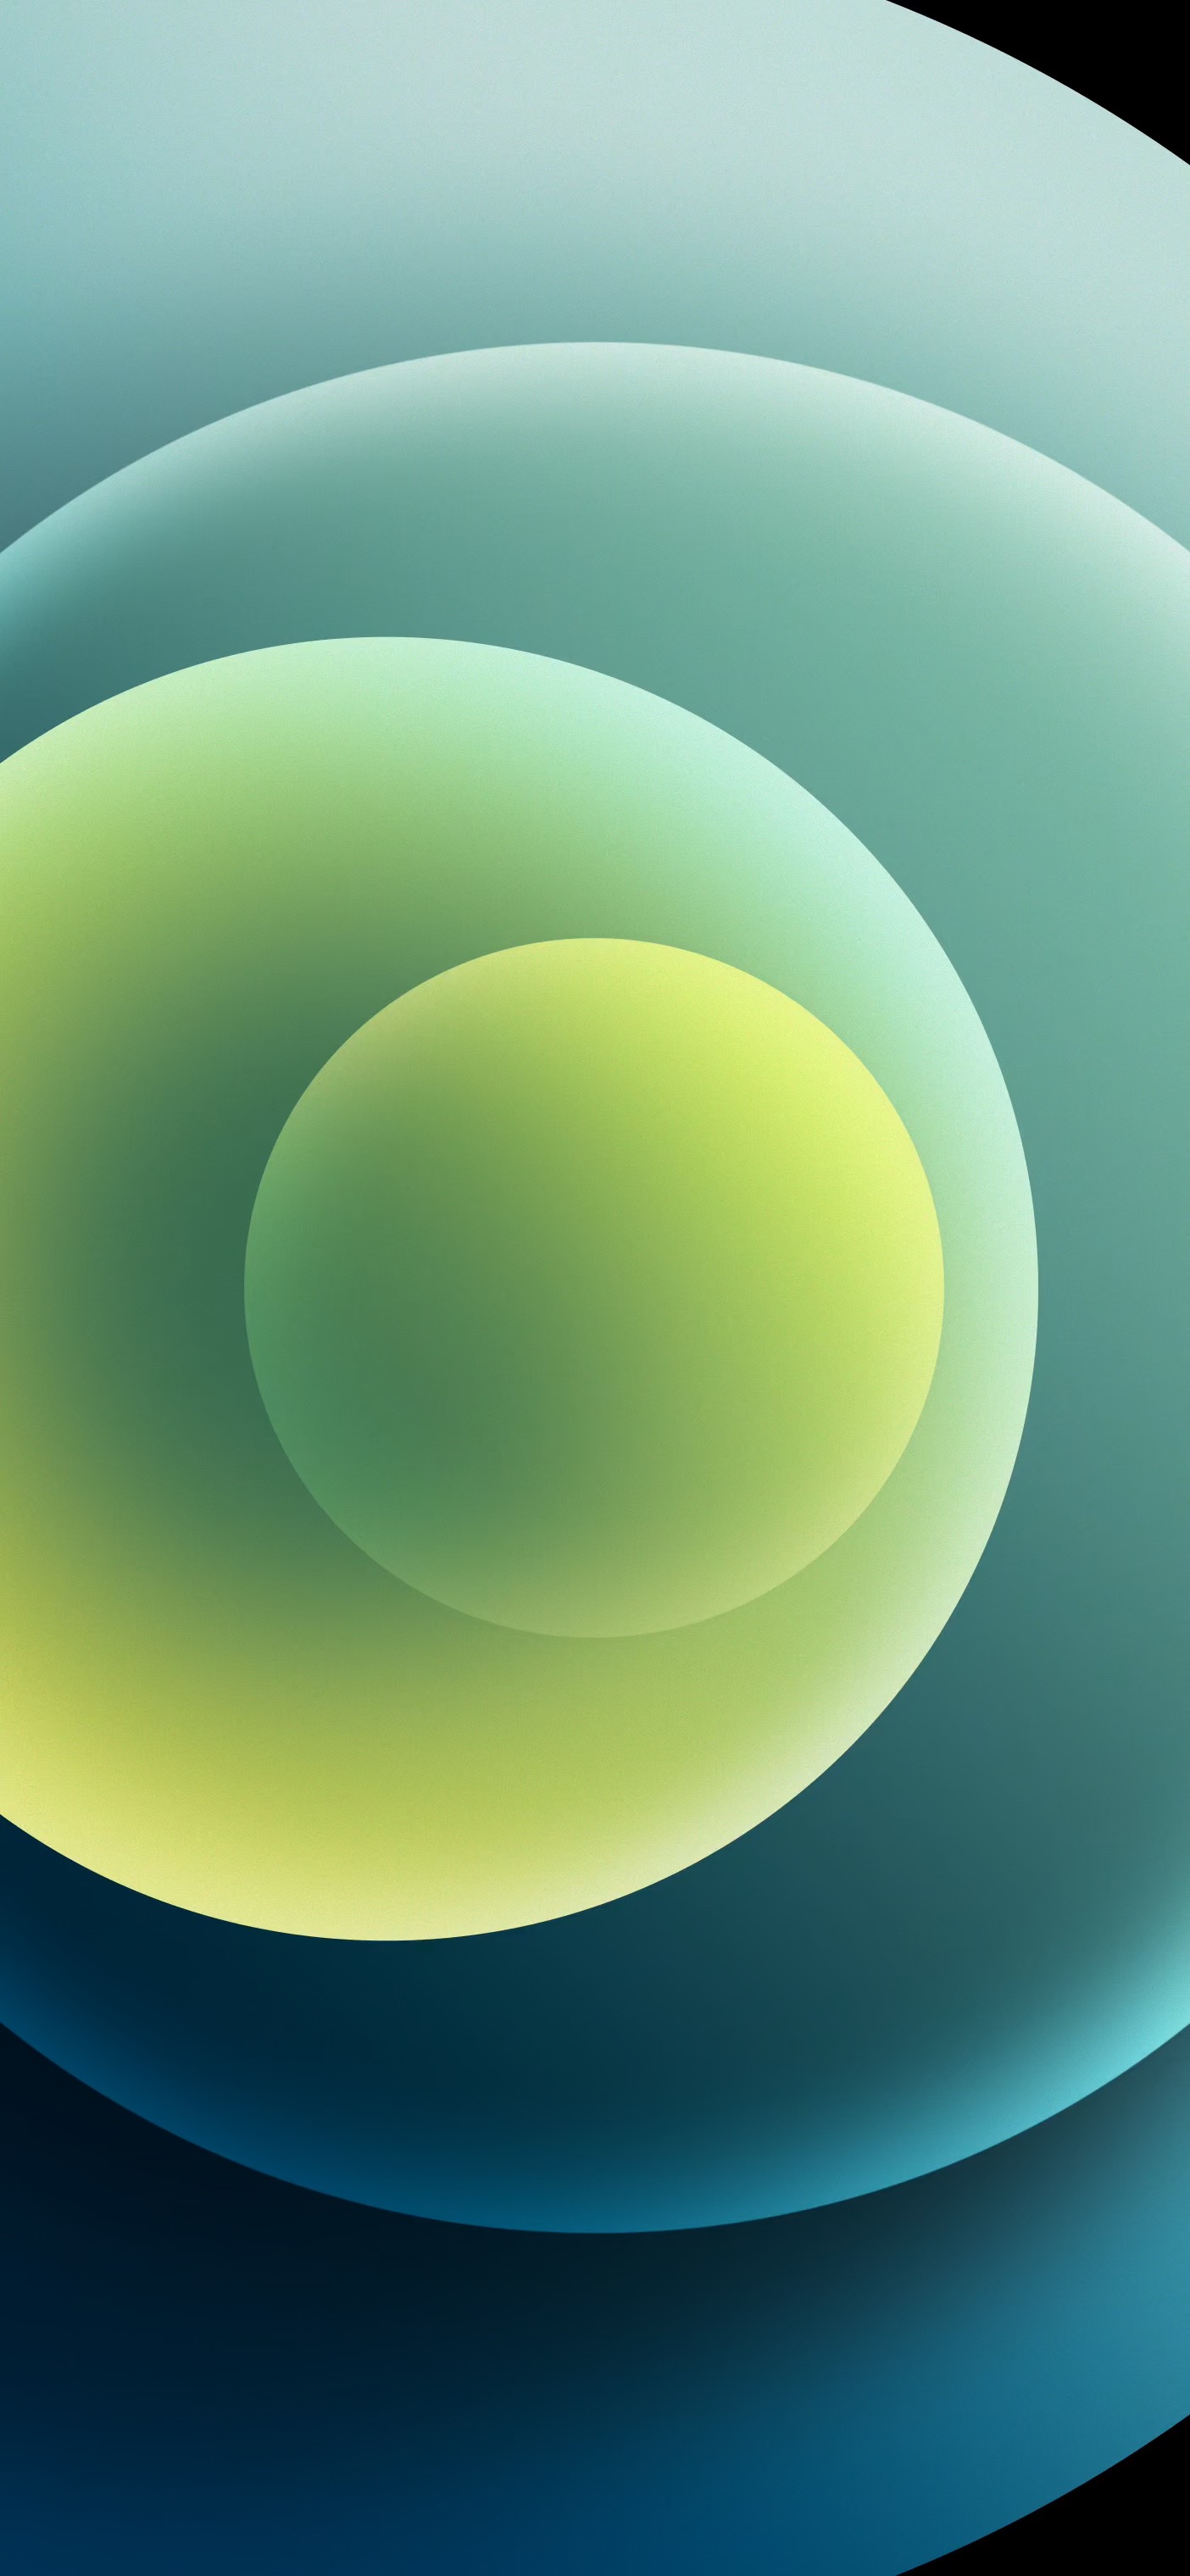 iPhone 12 - Orbs Green (Light) - LIVE Wallpaper - Wallpapers Central